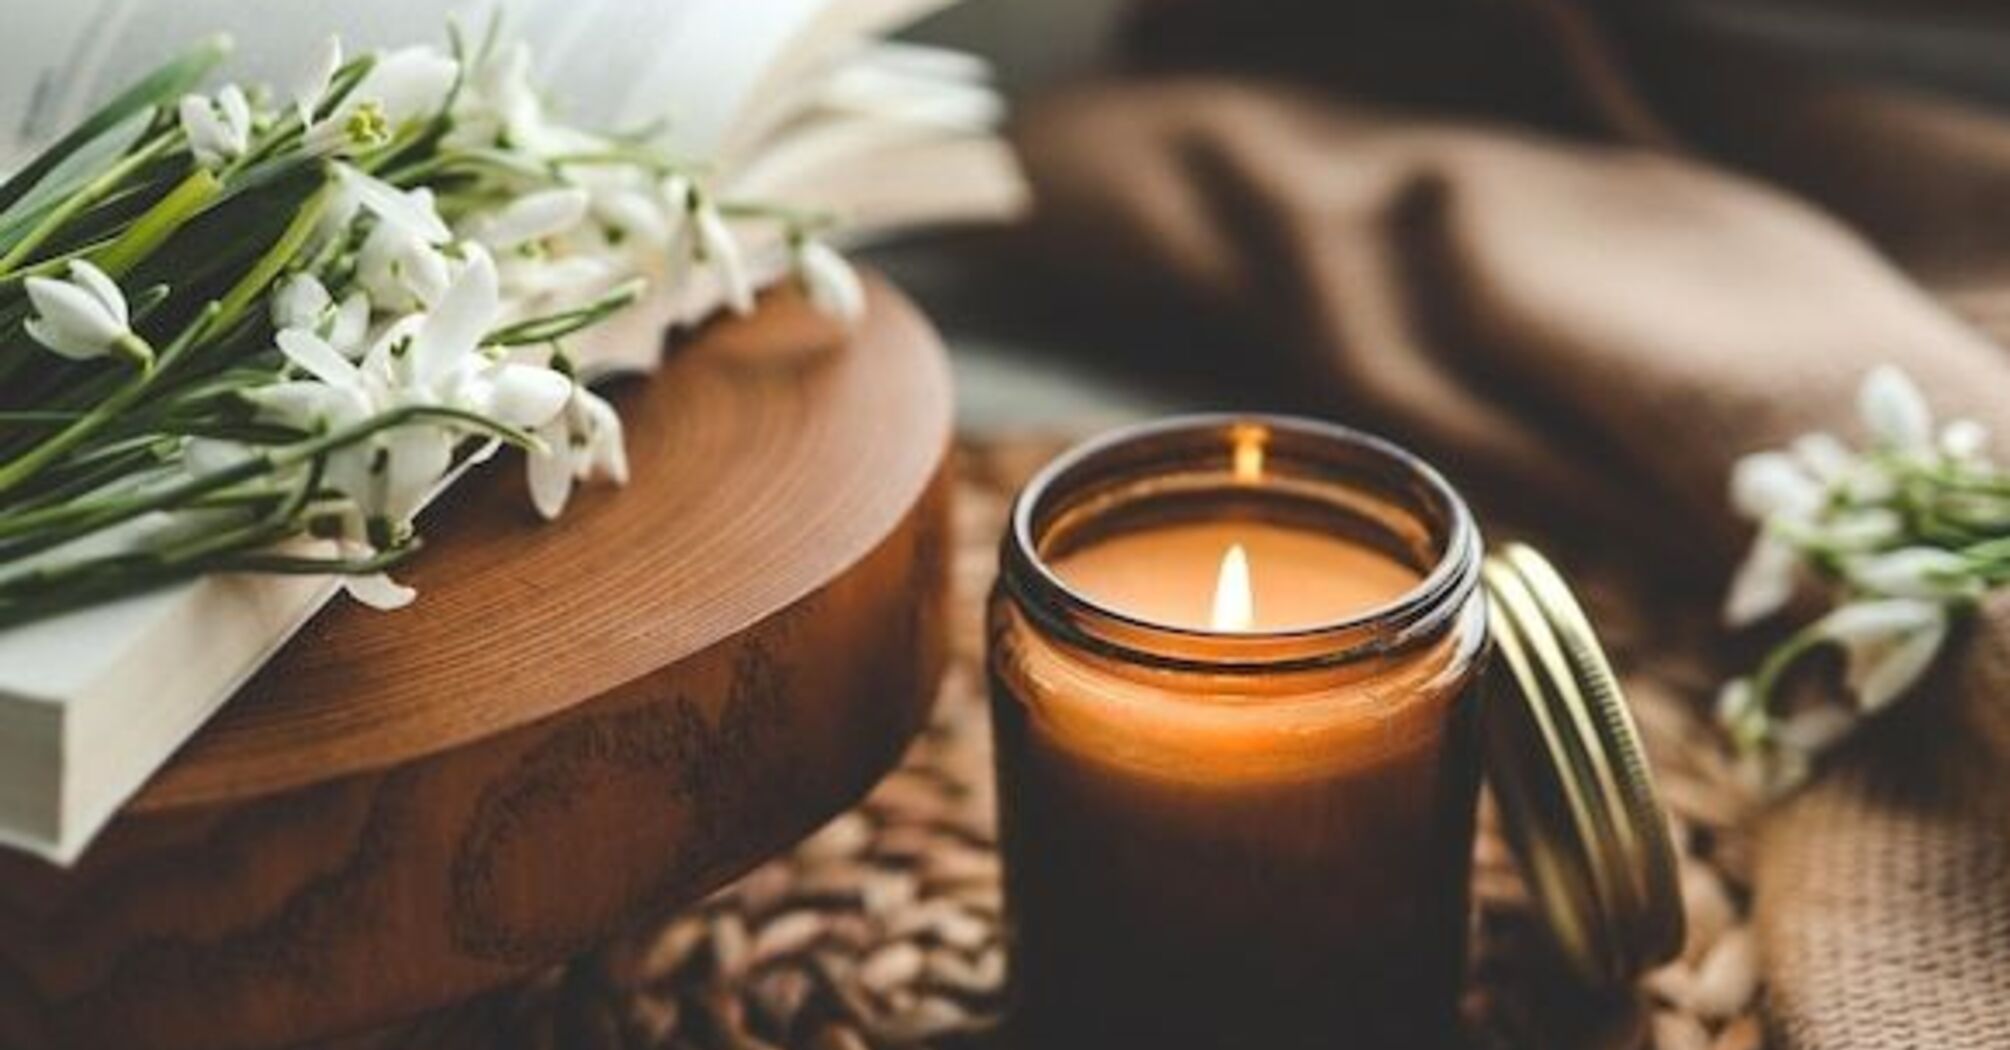 Should you buy scented candles: all pros and cons